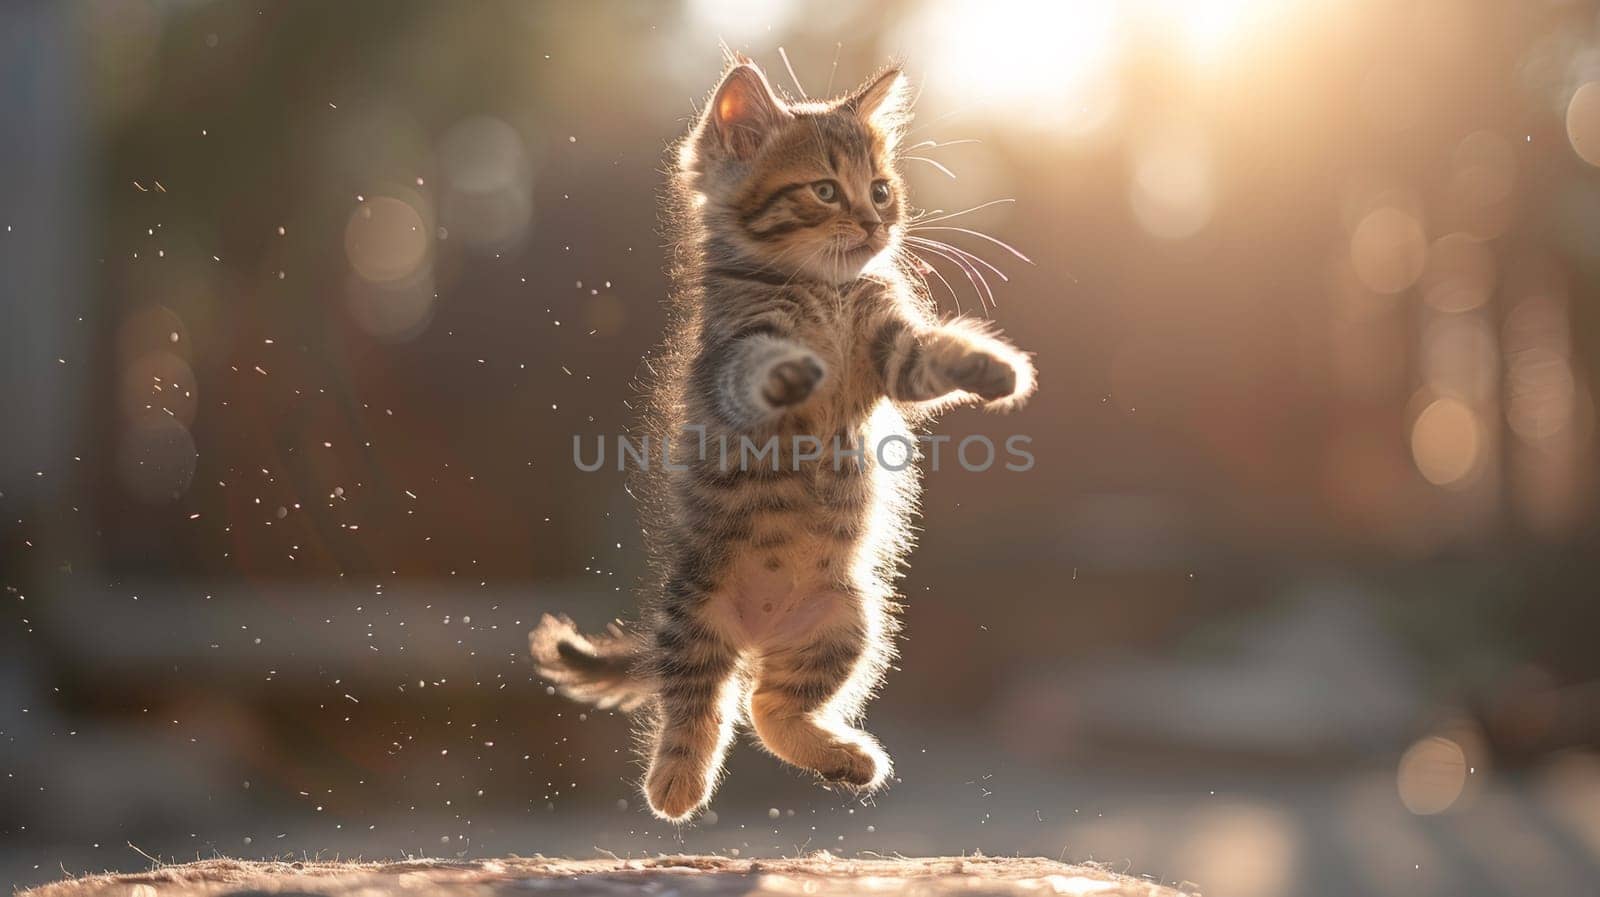 A kitten jumping up into the air while standing on a rock, AI by starush